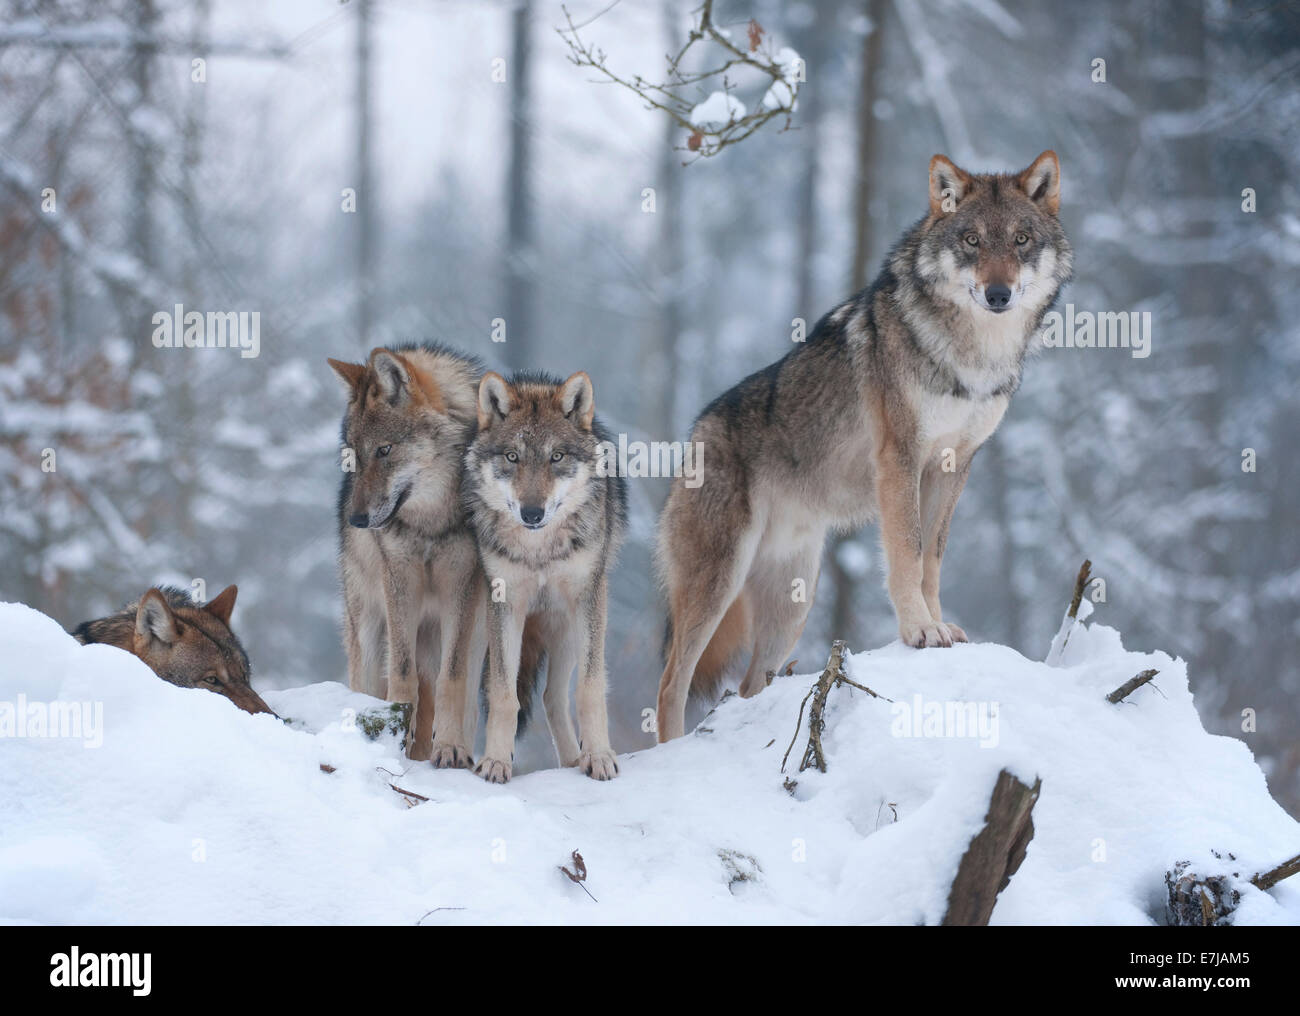 Grey Wolves (Canis lupus), two juveniles and one adult animal, standing in the snow, captive, Bavaria, Germany Stock Photo